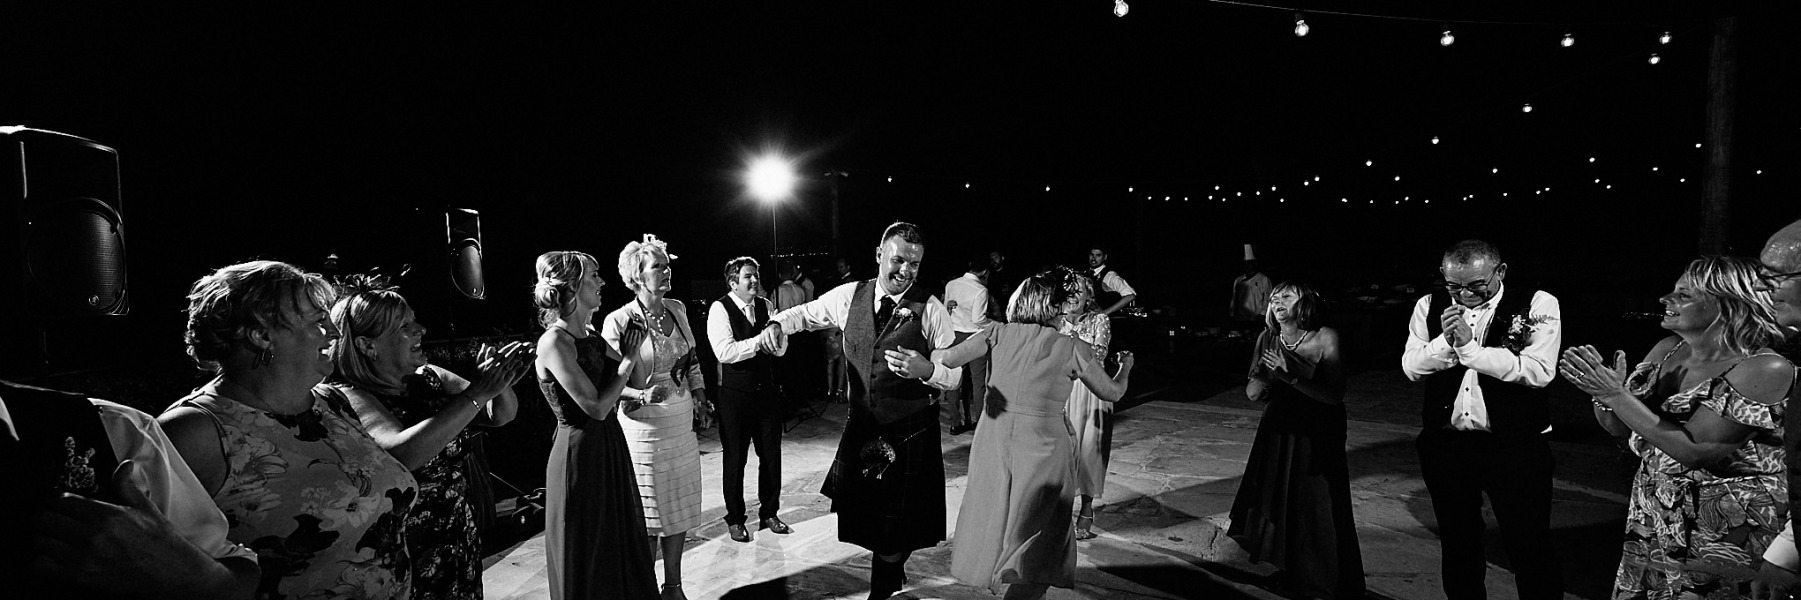 The Scottish wedding of Kirsten and Ryan, held in the Liopetro venue in Kouklia, nestled in the Cypriot countryside overlooking the Mediterranean Sea